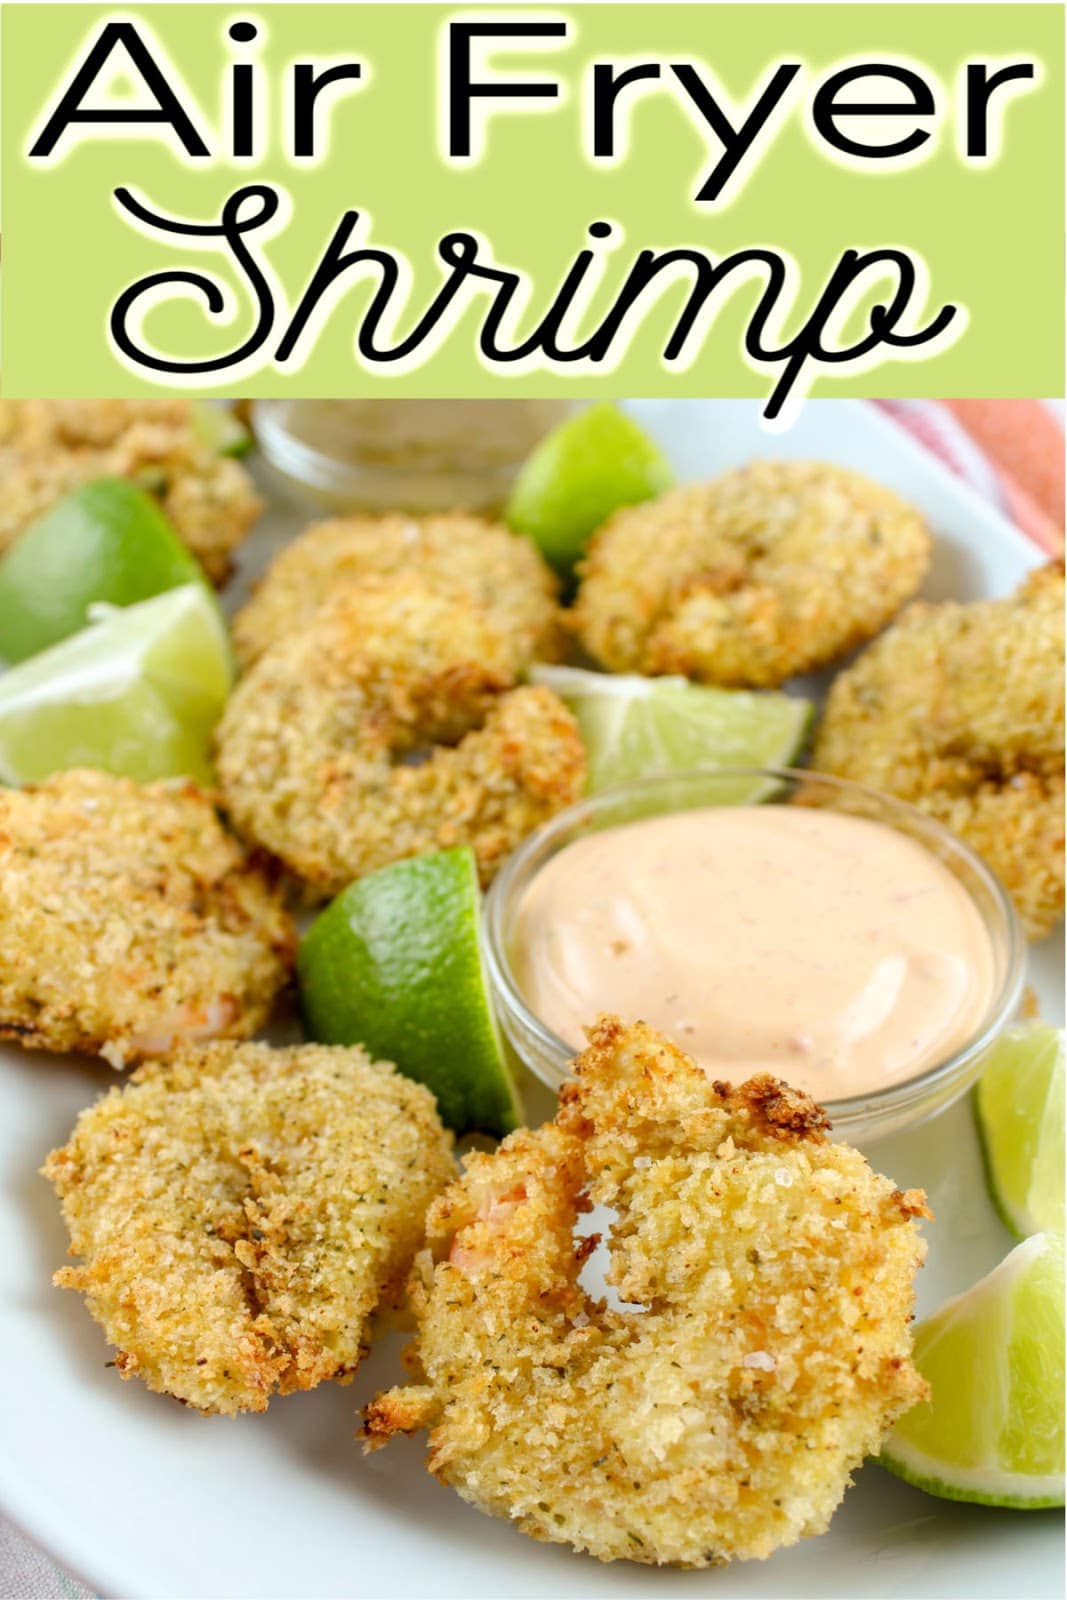 Air fryer shrimp is the best! It cooks so quickly – it’s so crunchy and I’ve made this Cilantro Lime Breaded Shrimp zingy and flavorful! Every bite packs a punch!
 via @foodhussy